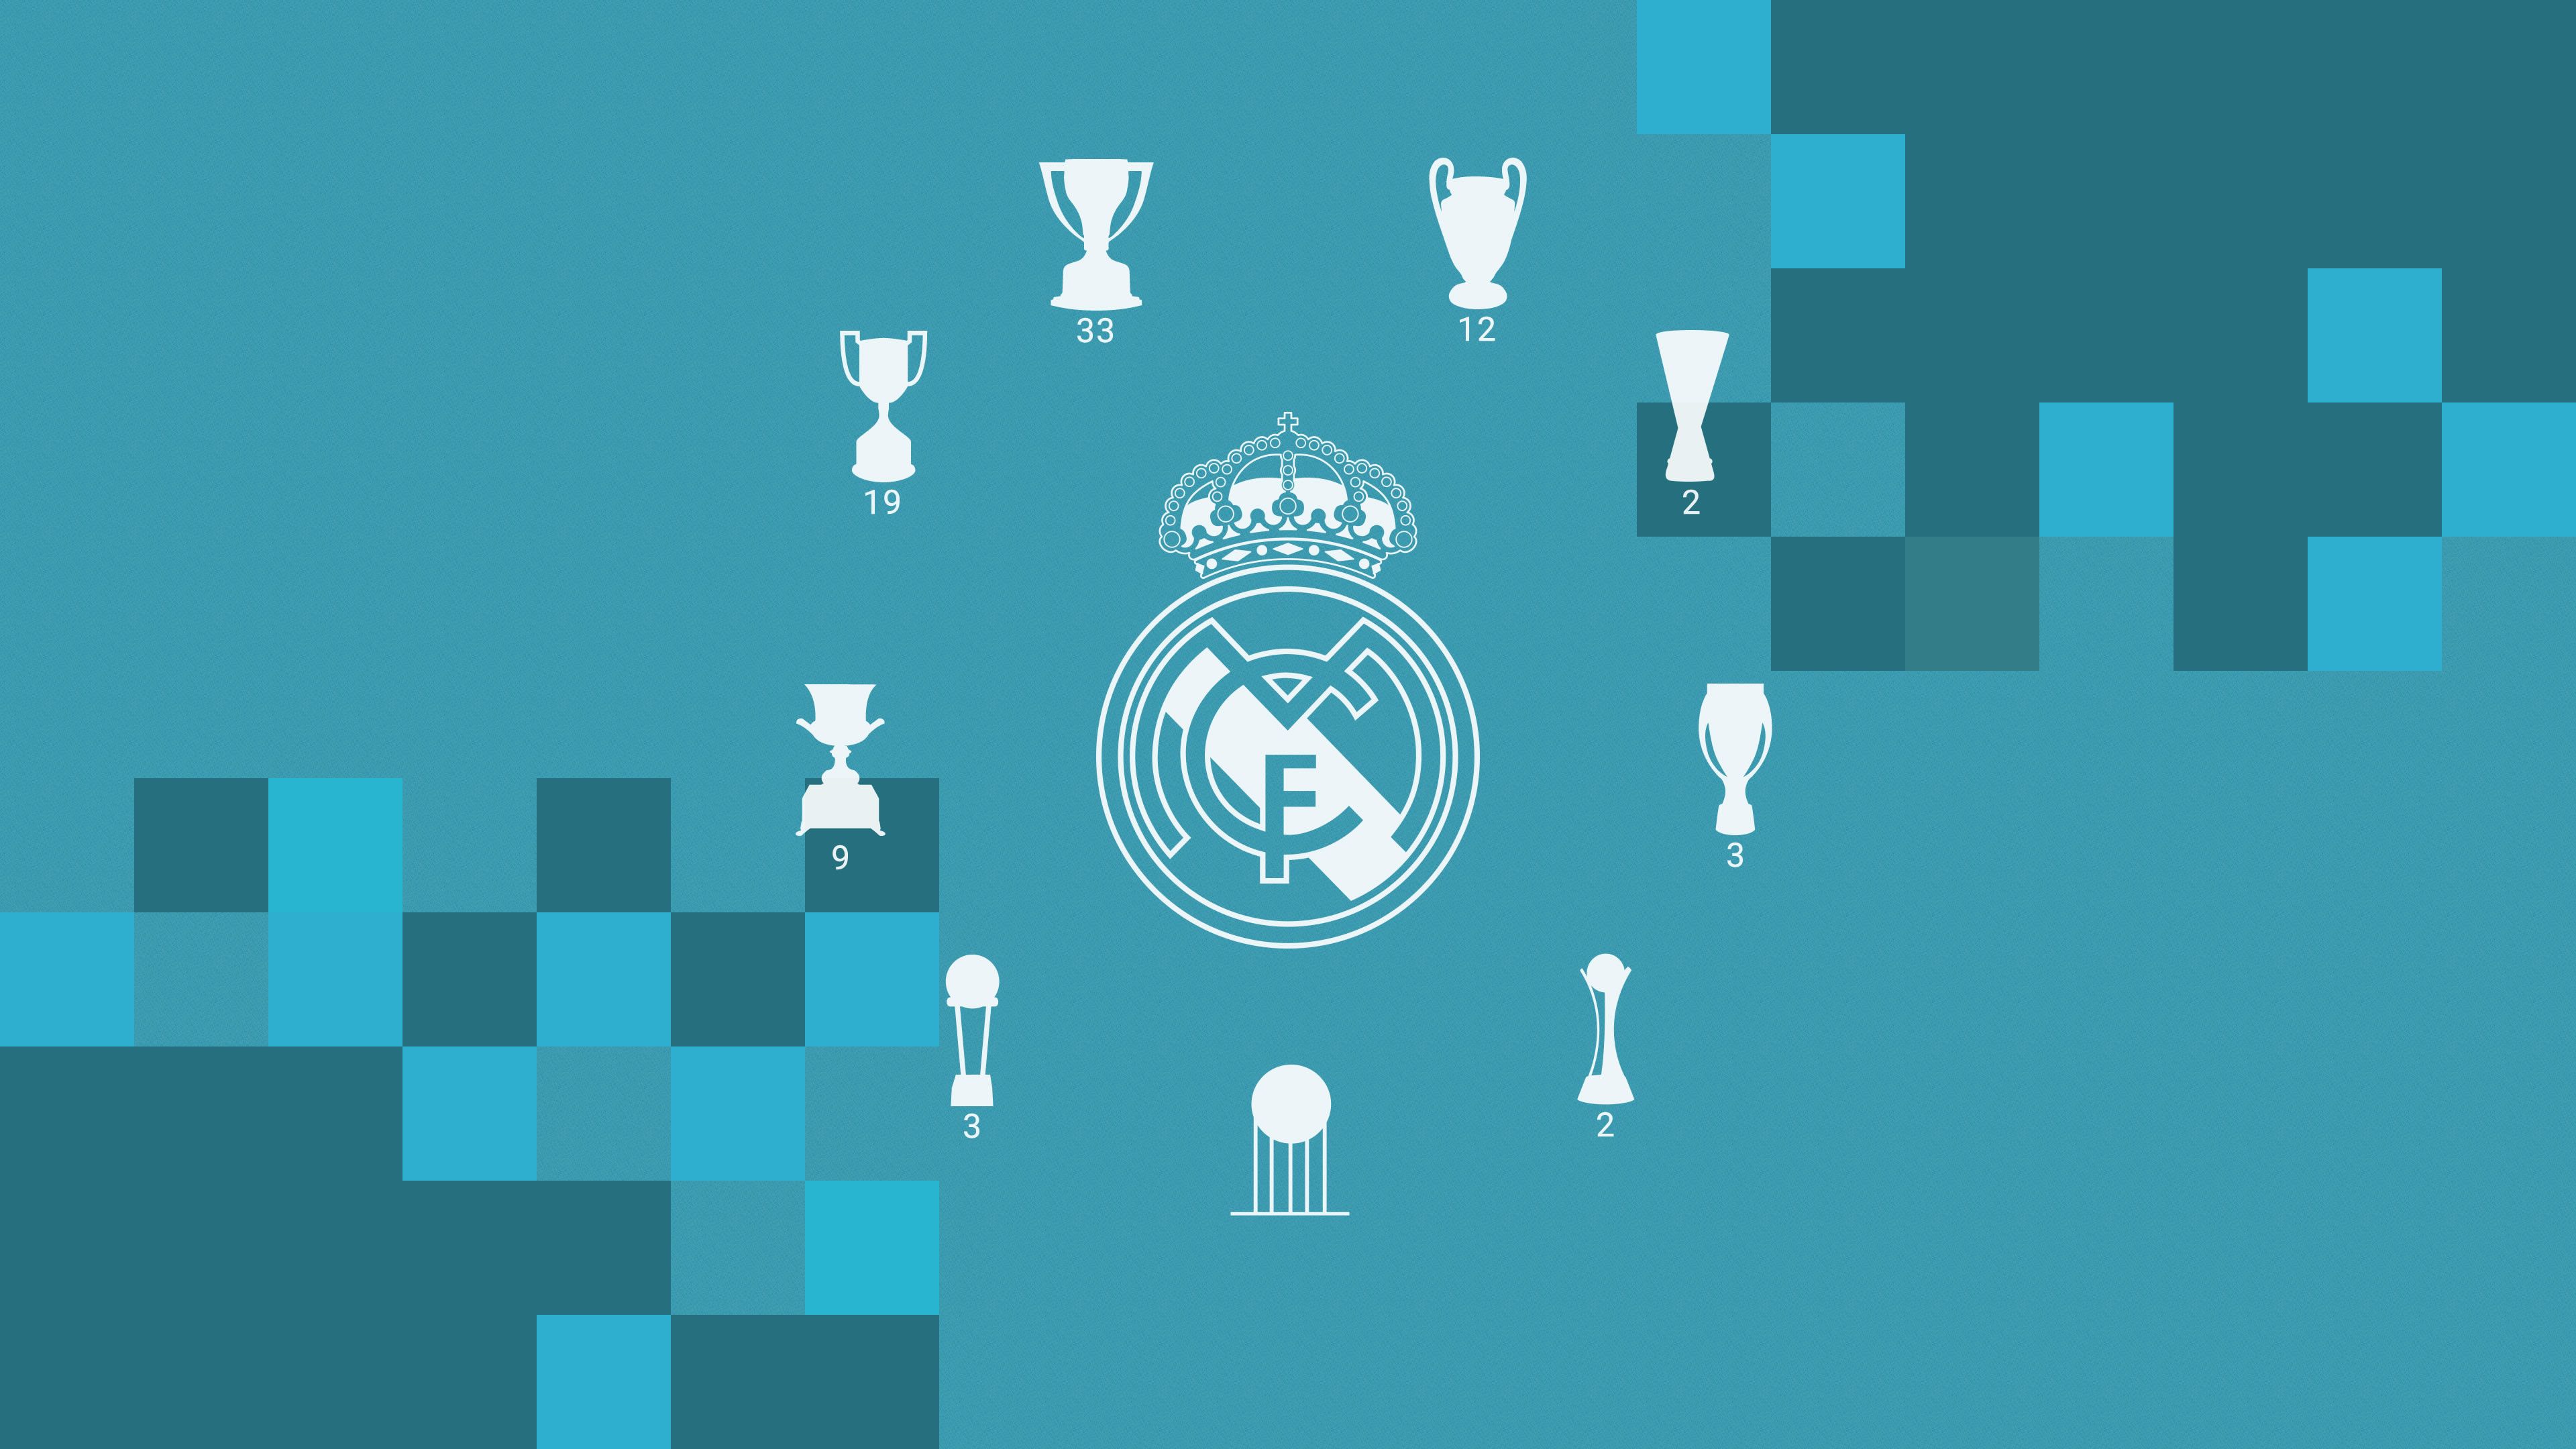 Free Download Real Madrid HD Wallpaper 2018 - [3840x2160] For Your Desktop, Mobile & Tablet. Explore Real Madrid Players 2018 Wallpaper. Real Madrid Players 2018 Wallpaper, Real Madrid 2018 Wallpaper, Real Madrid 2018 2019 Wallpaper